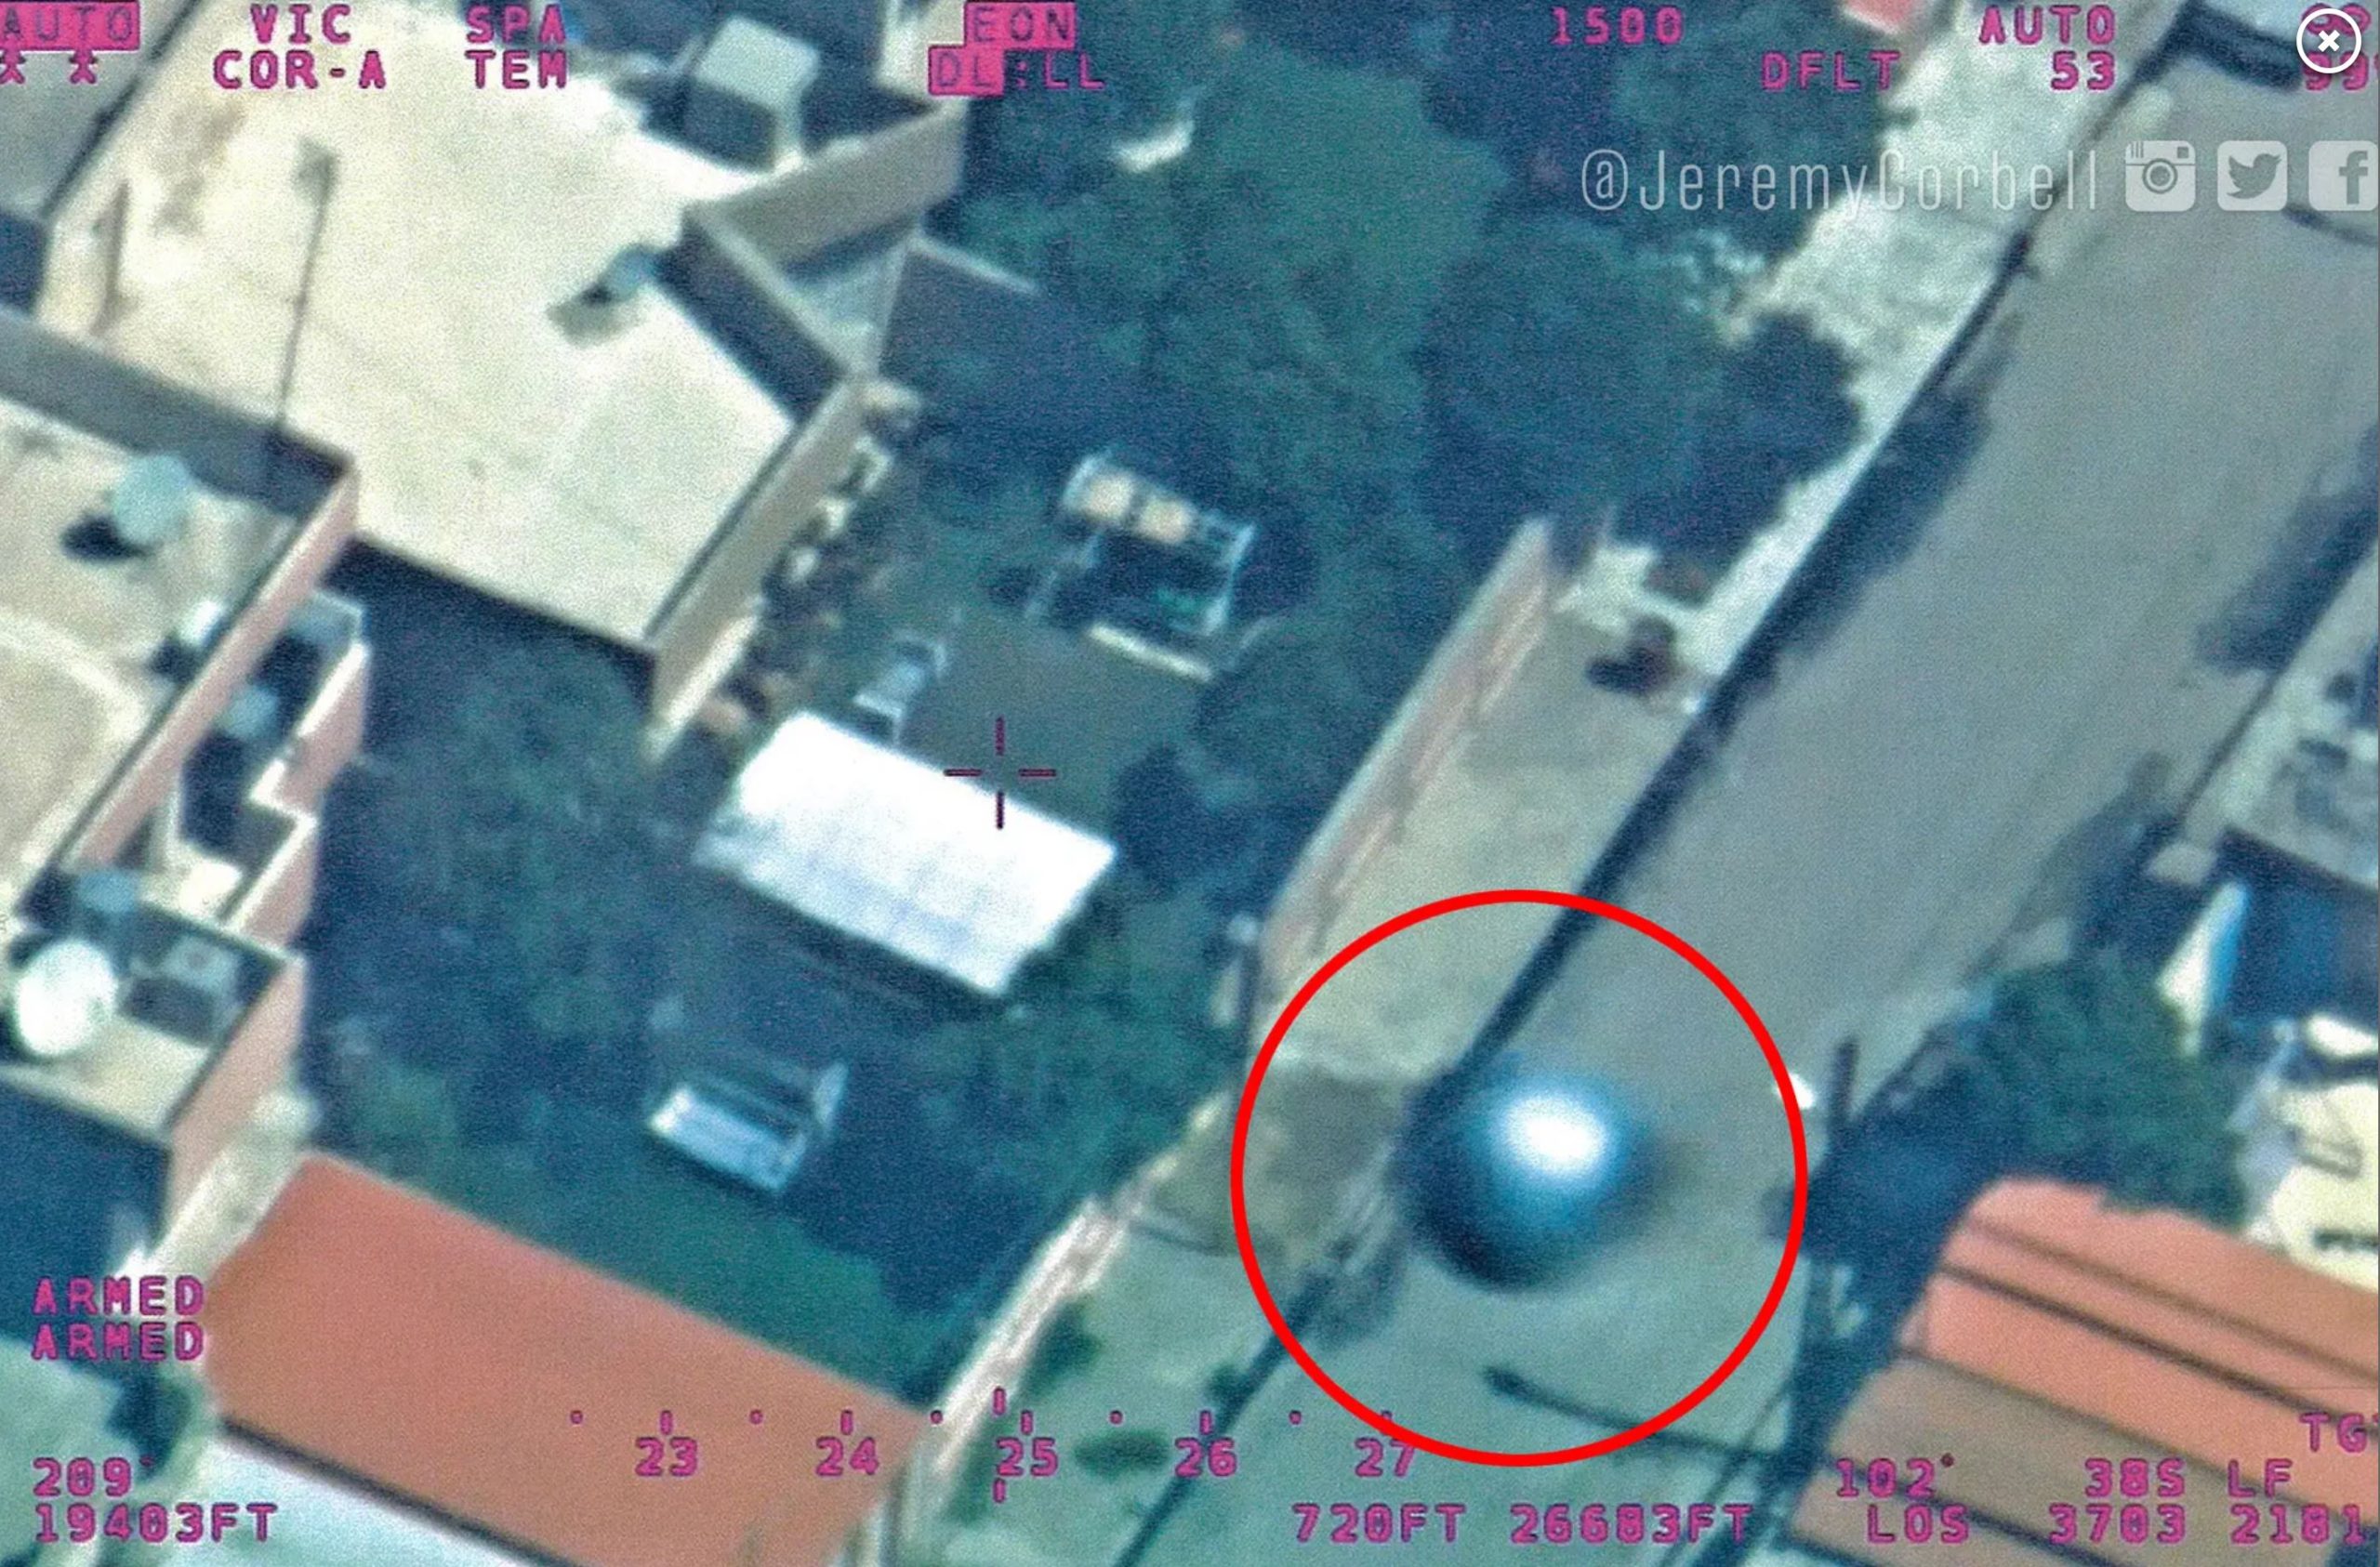 A screenshot of the spherical UFO snapped by a US Spy plane over Iraq. Image Credit: Jeremy Corbell.